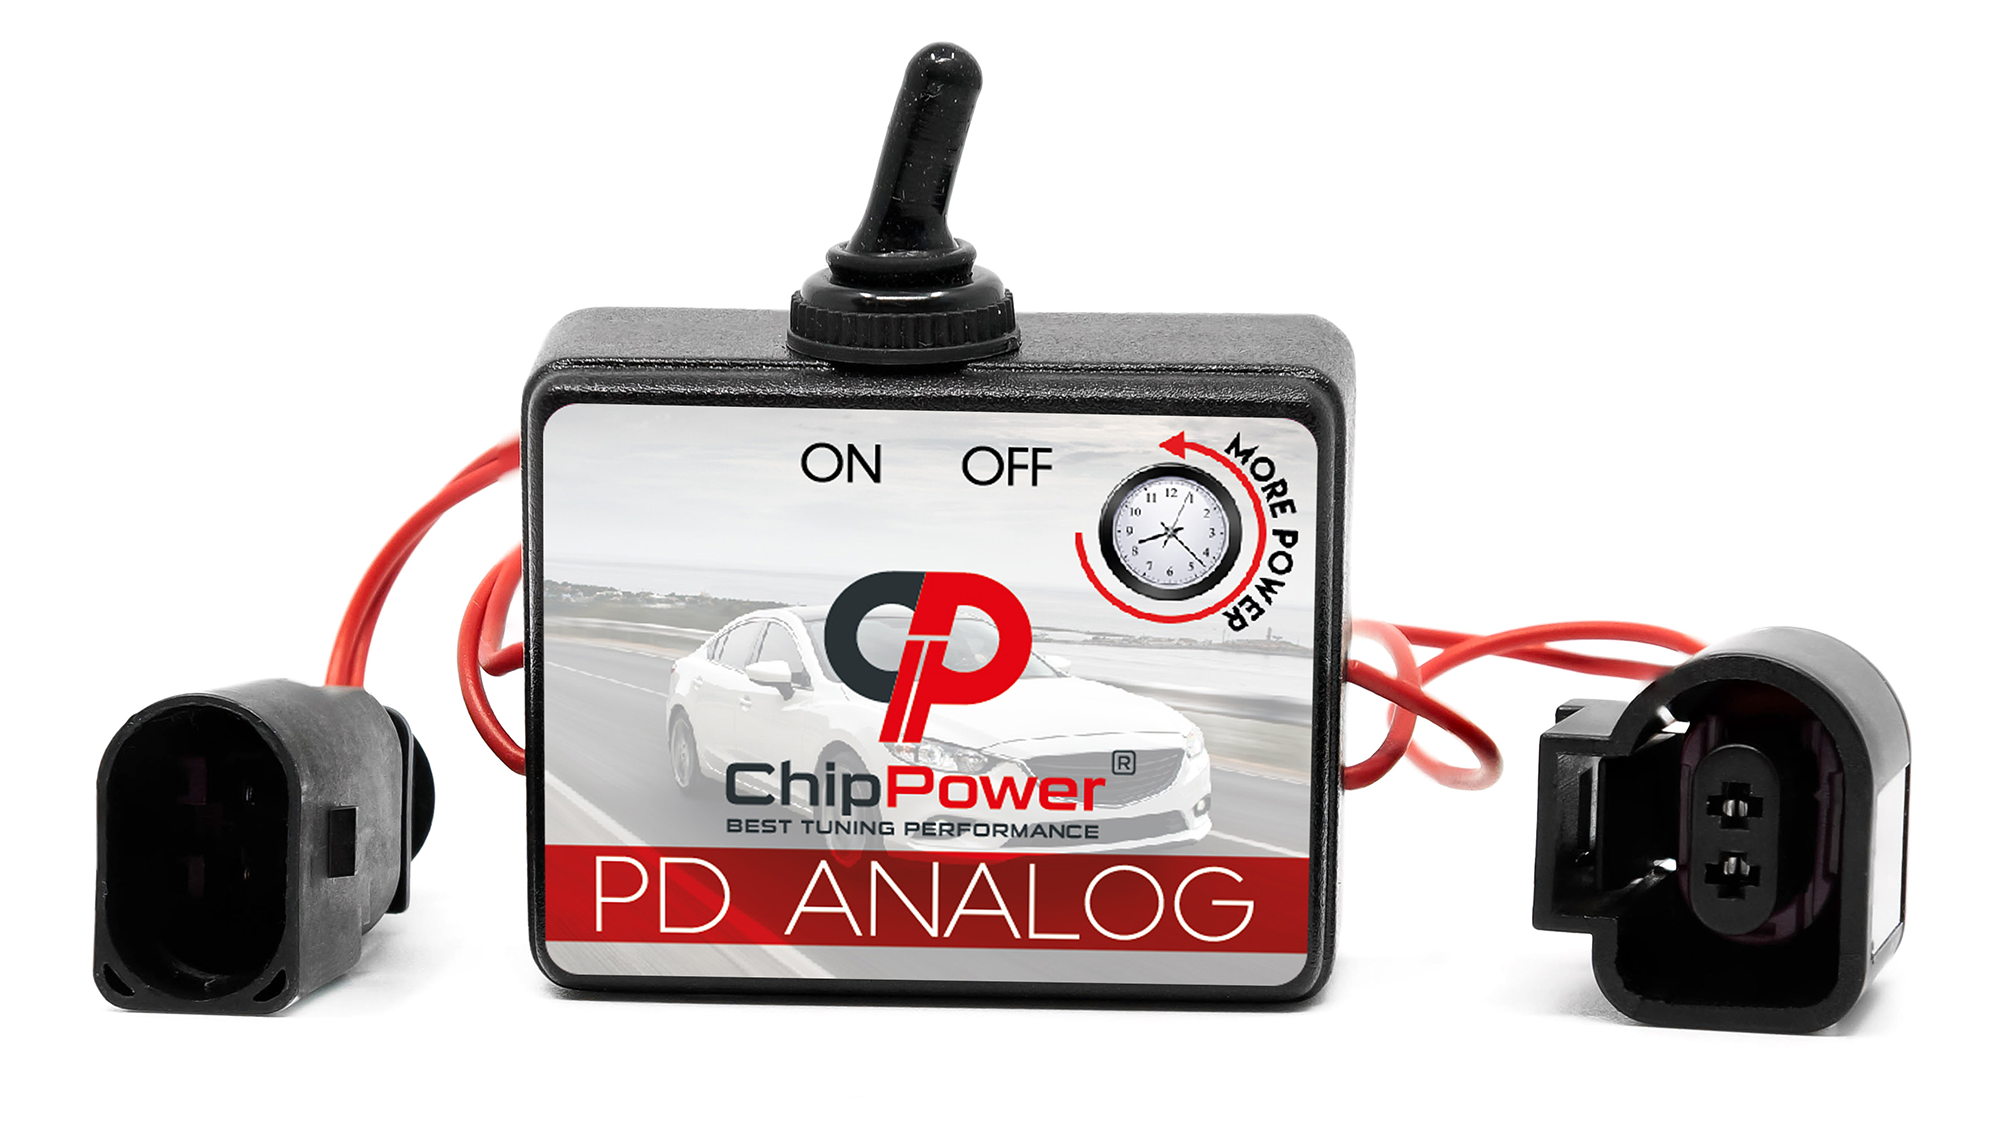 ChipPower PD Analog